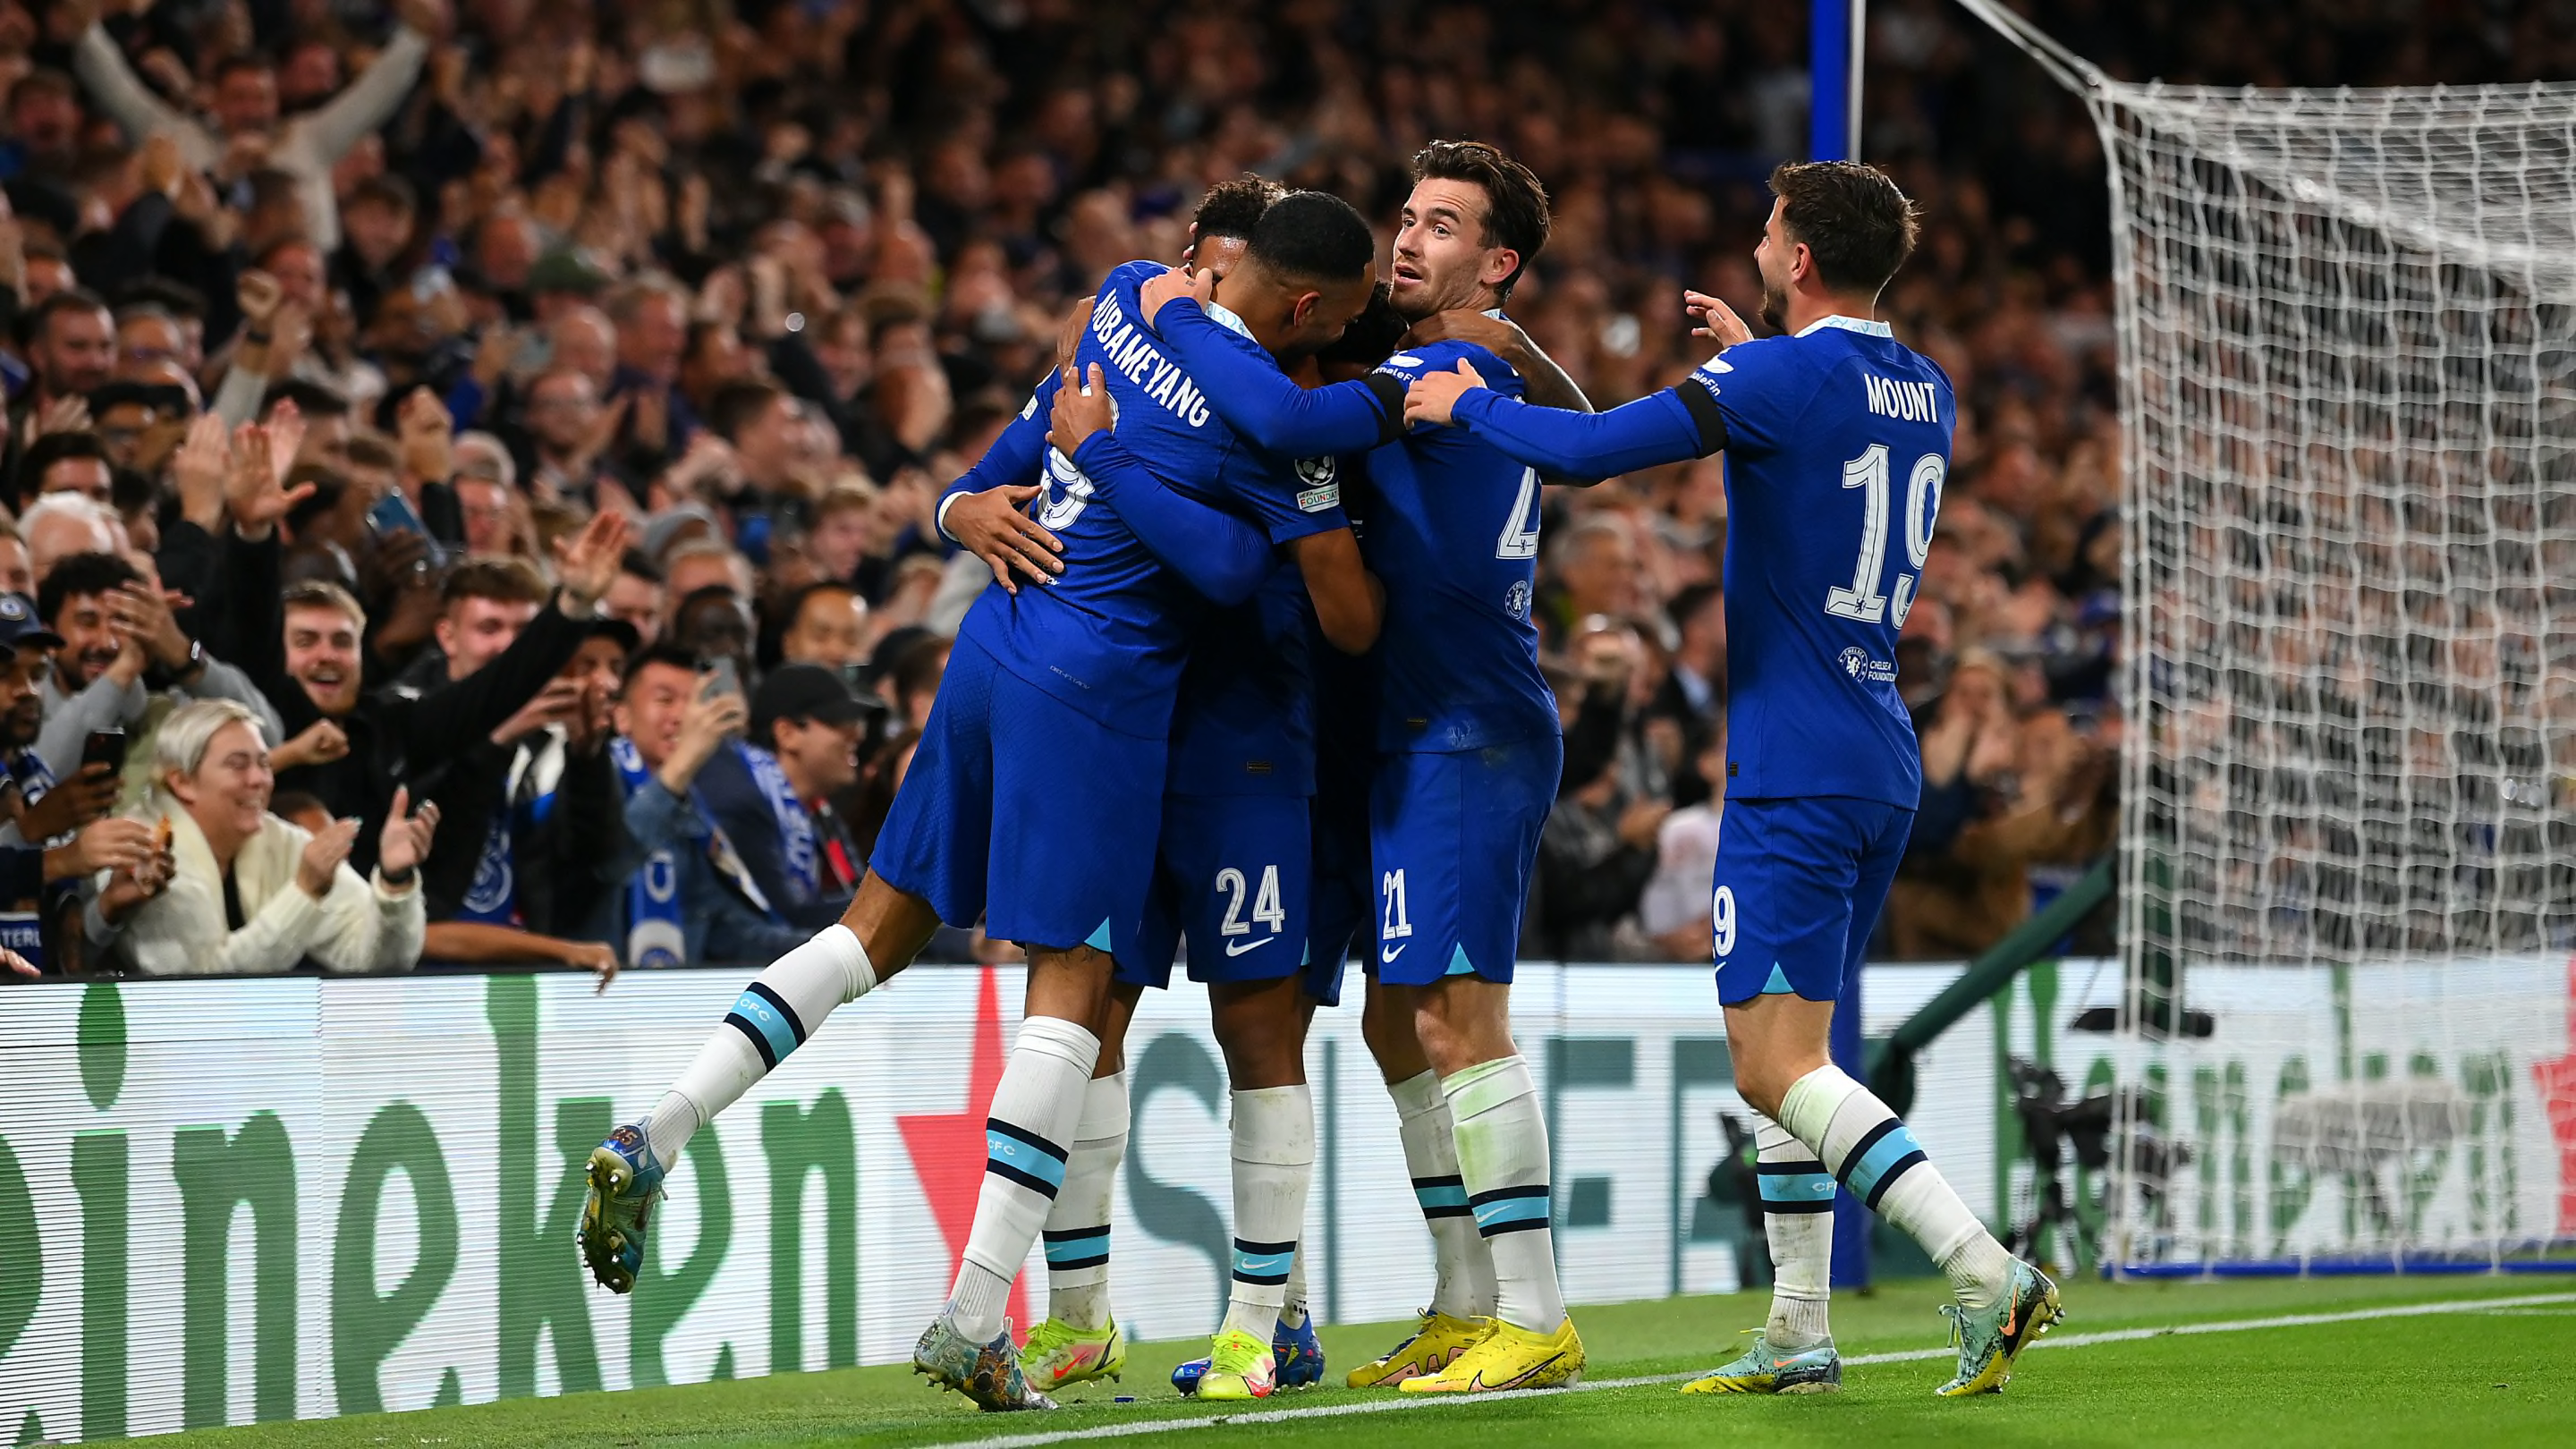 Chelsea 3-0 AC Milan: Player ratings as Blues secure first Champions League win of 2022/23